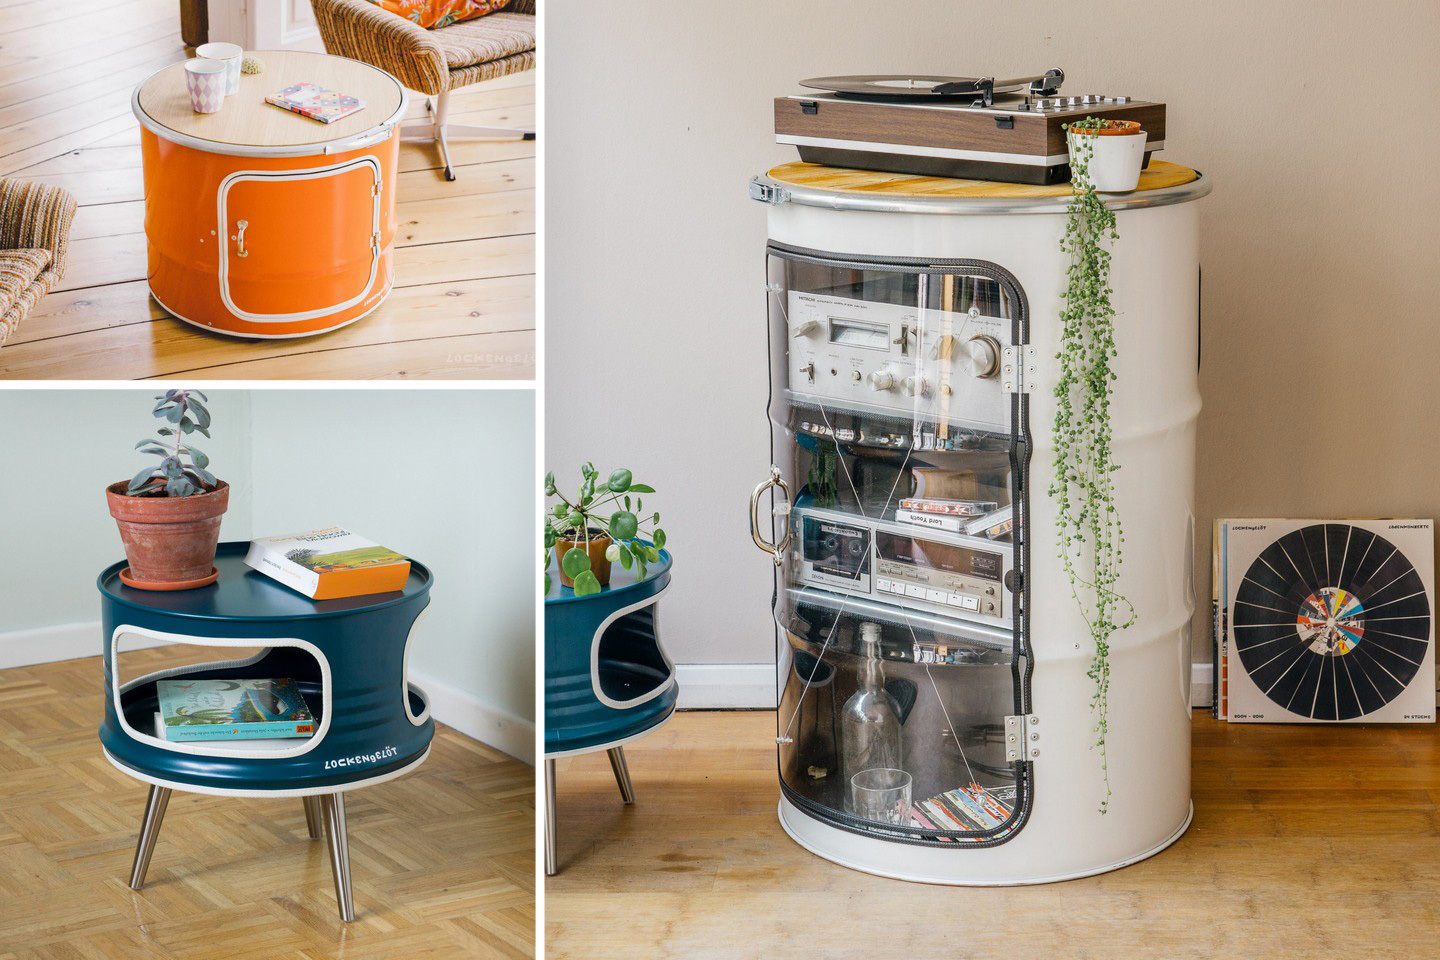 #These discarded oil barrels are getting a new lease of life by being upcycled into furniture